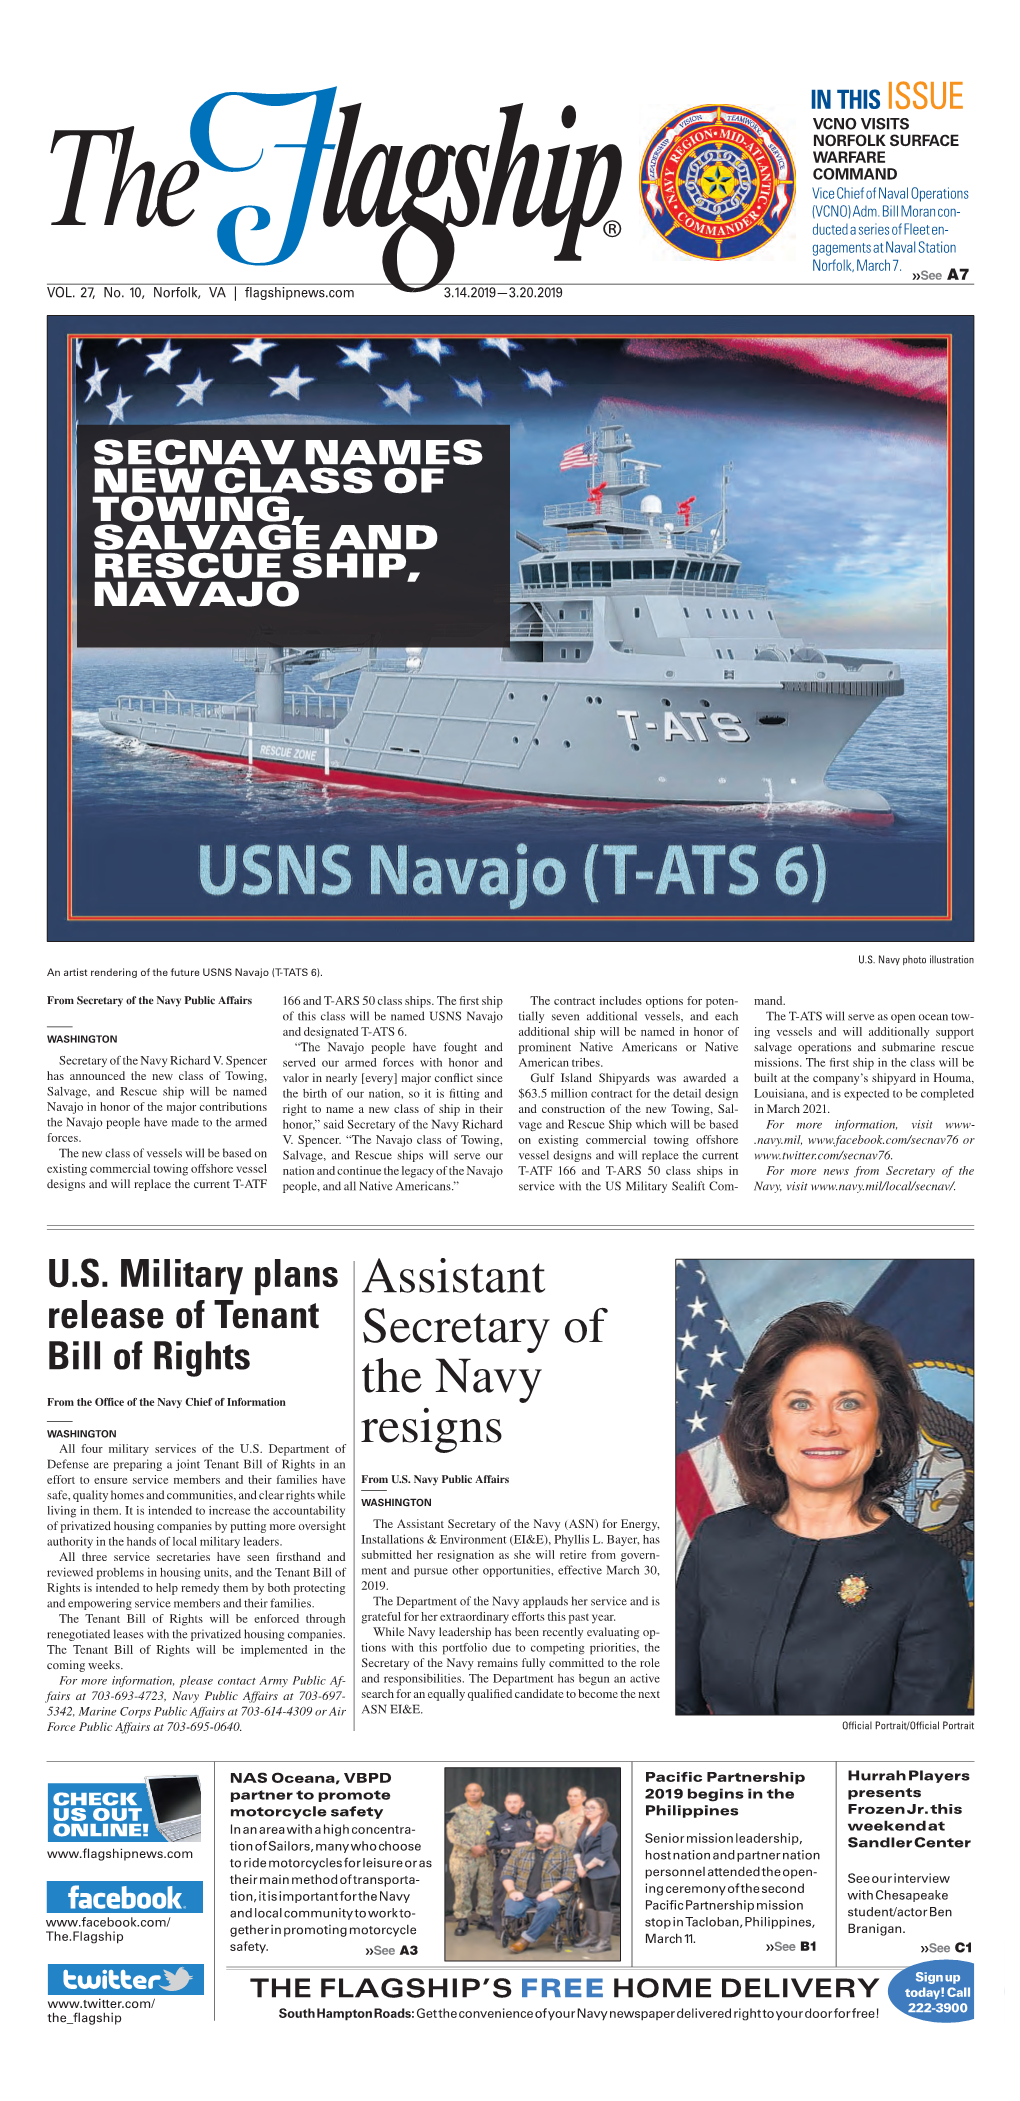 Assistant Secretary of the Navy Resigns